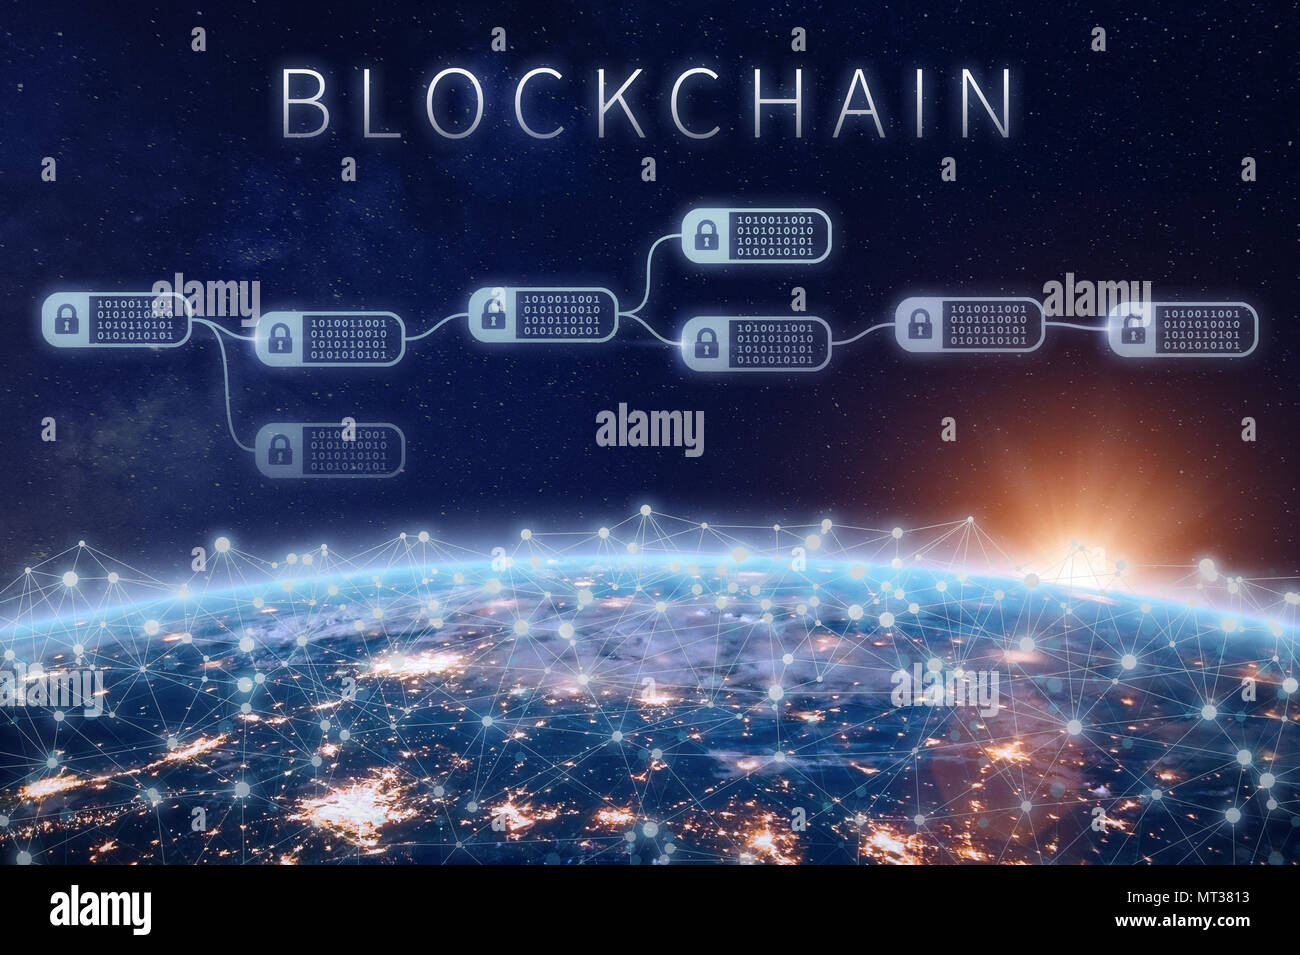 Blockchain financial technology concept with network of encrypted chain of transaction block linked around planet Earth, cryptocurrency ledger (Bitcoi Stock Photo